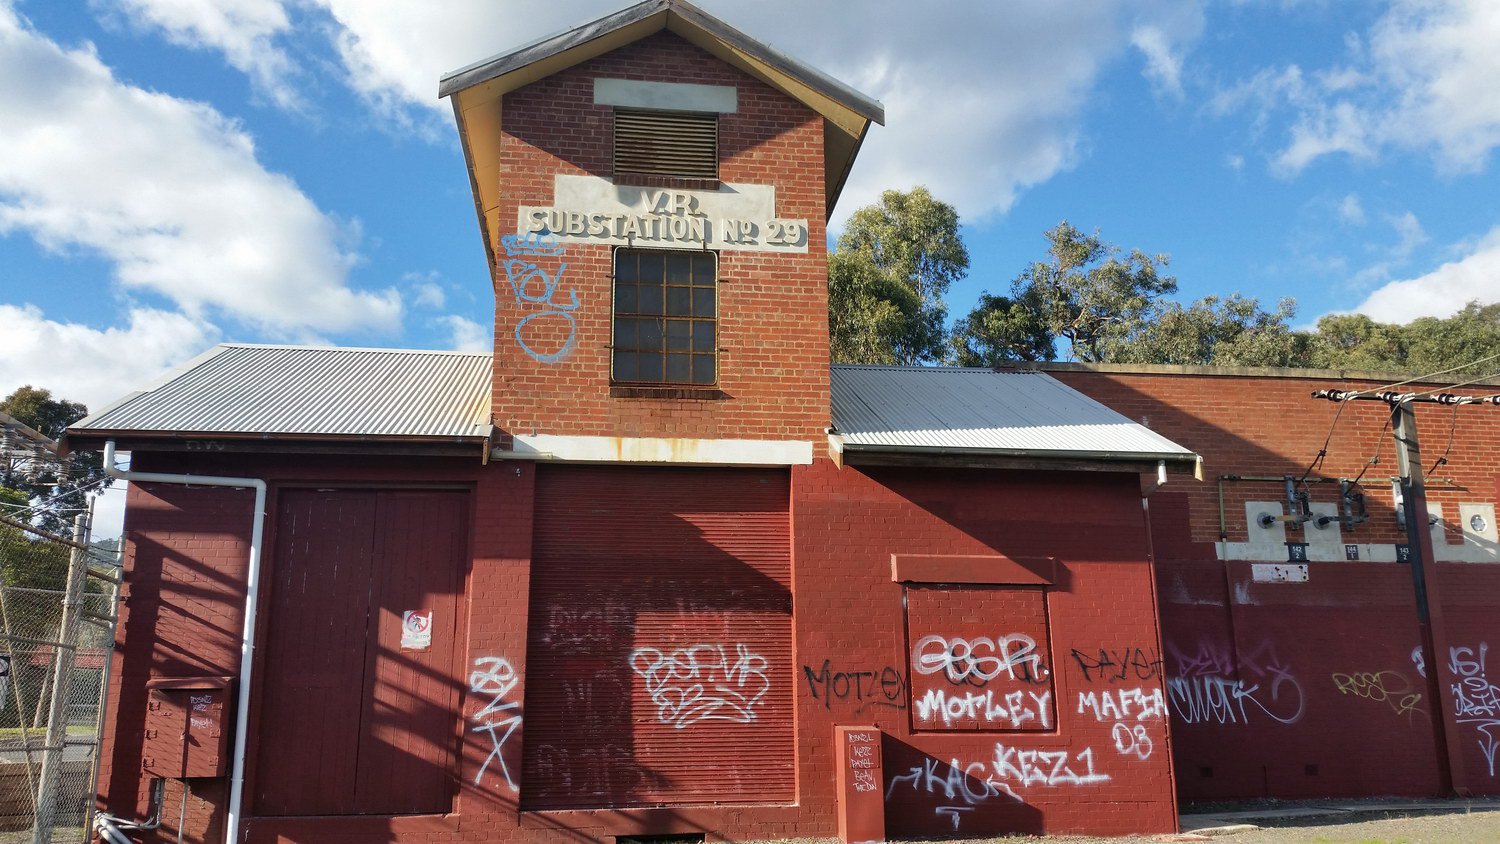 Early VR substation near Ferntree Gully. Ringwood to Belgrave Rail Trail ride. July 2018.